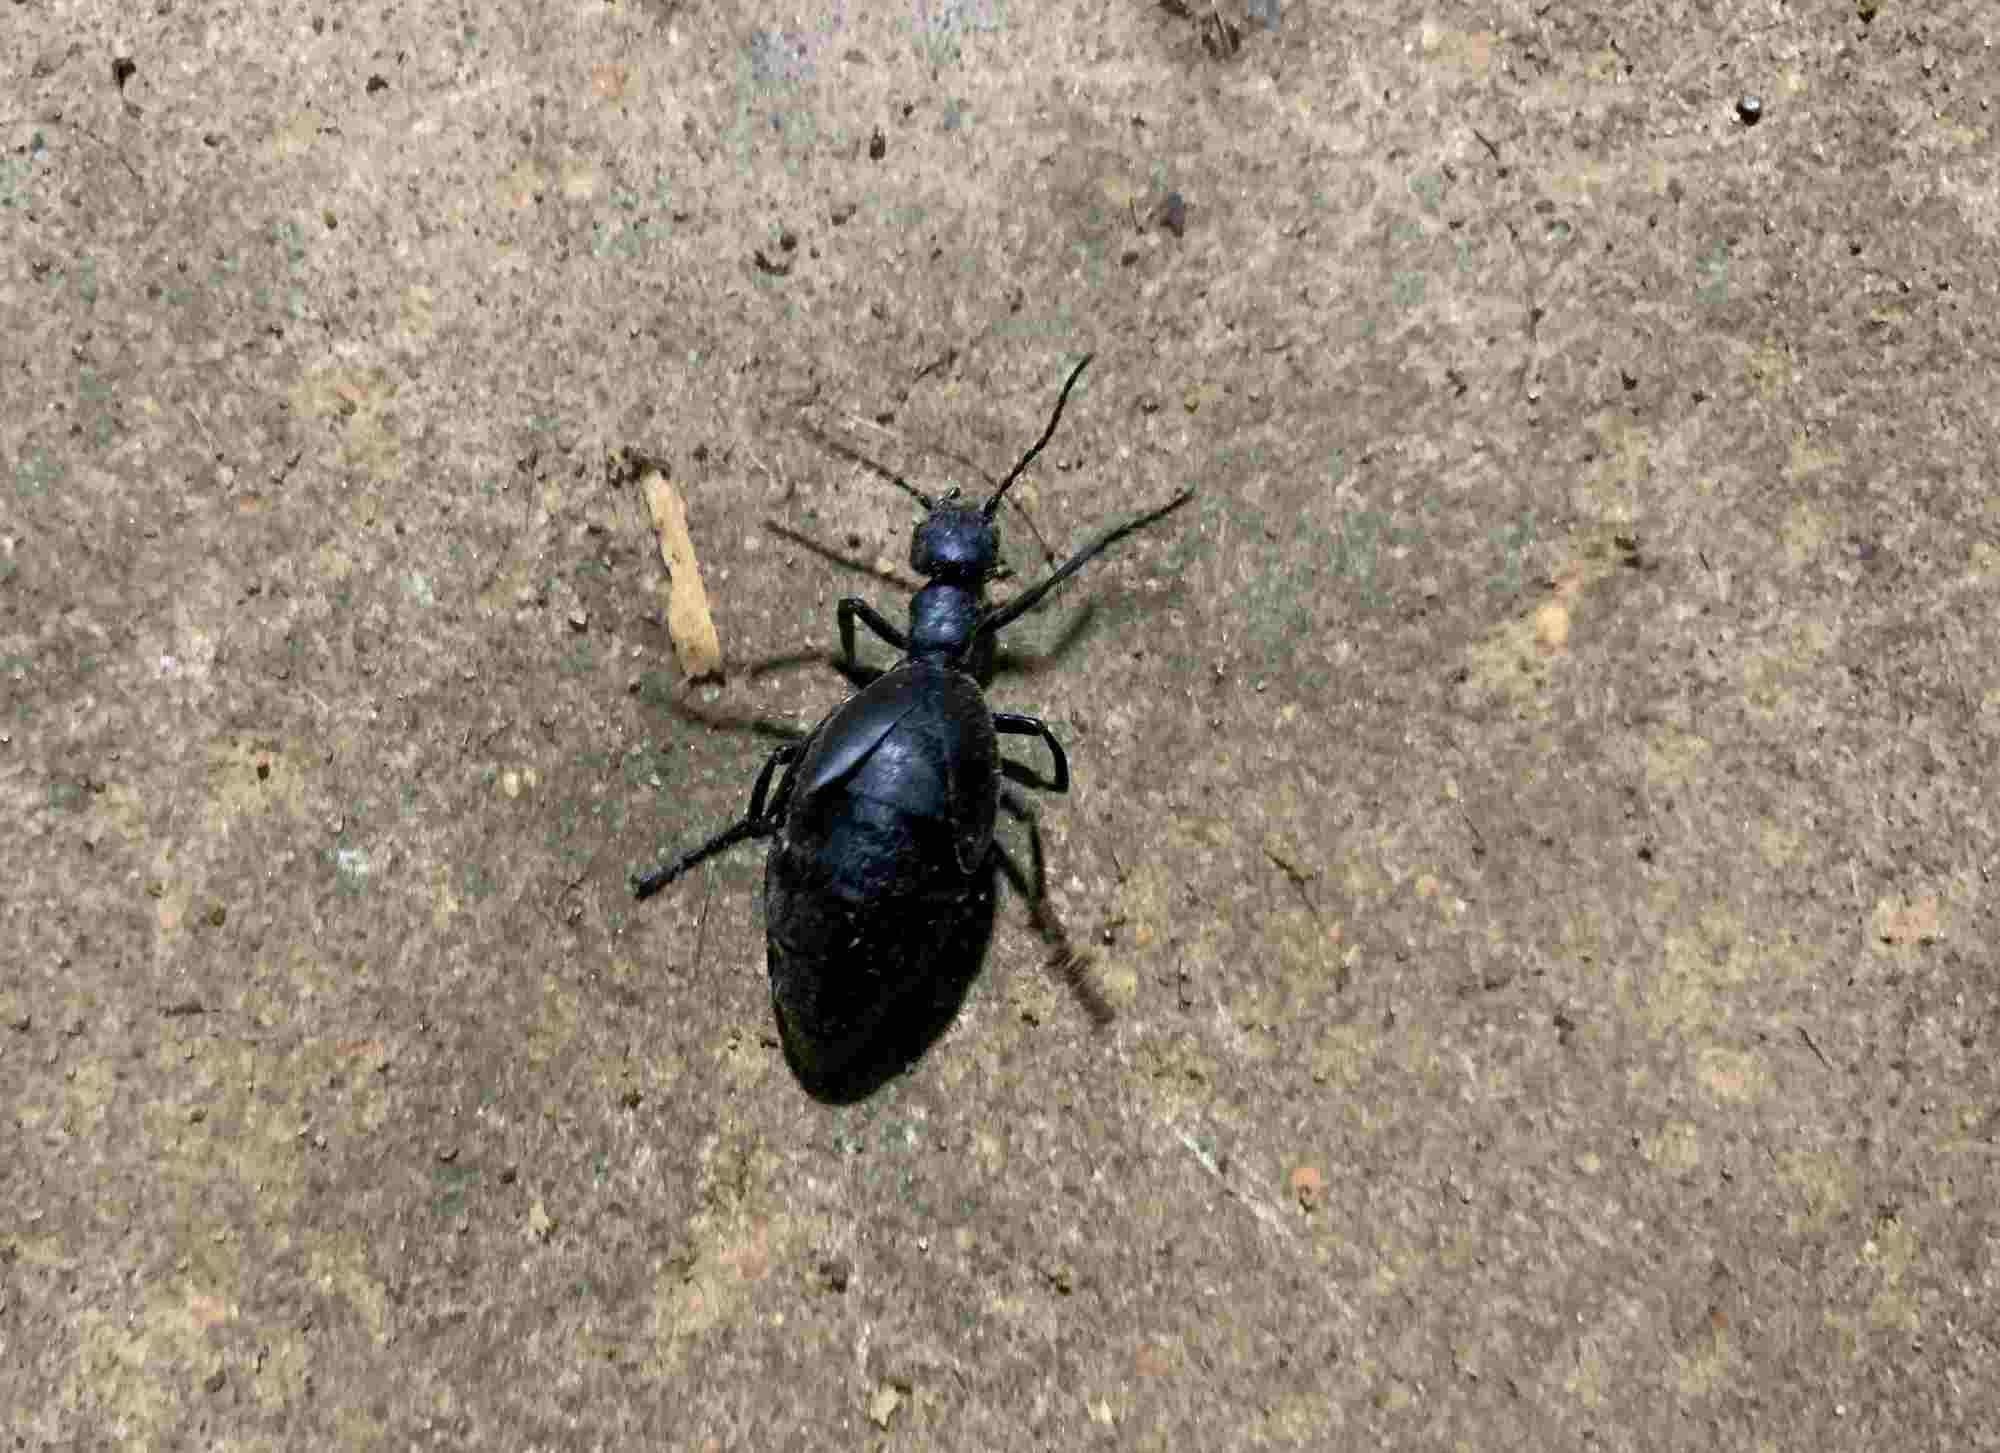 Fun Oil Beetle Facts For Kids